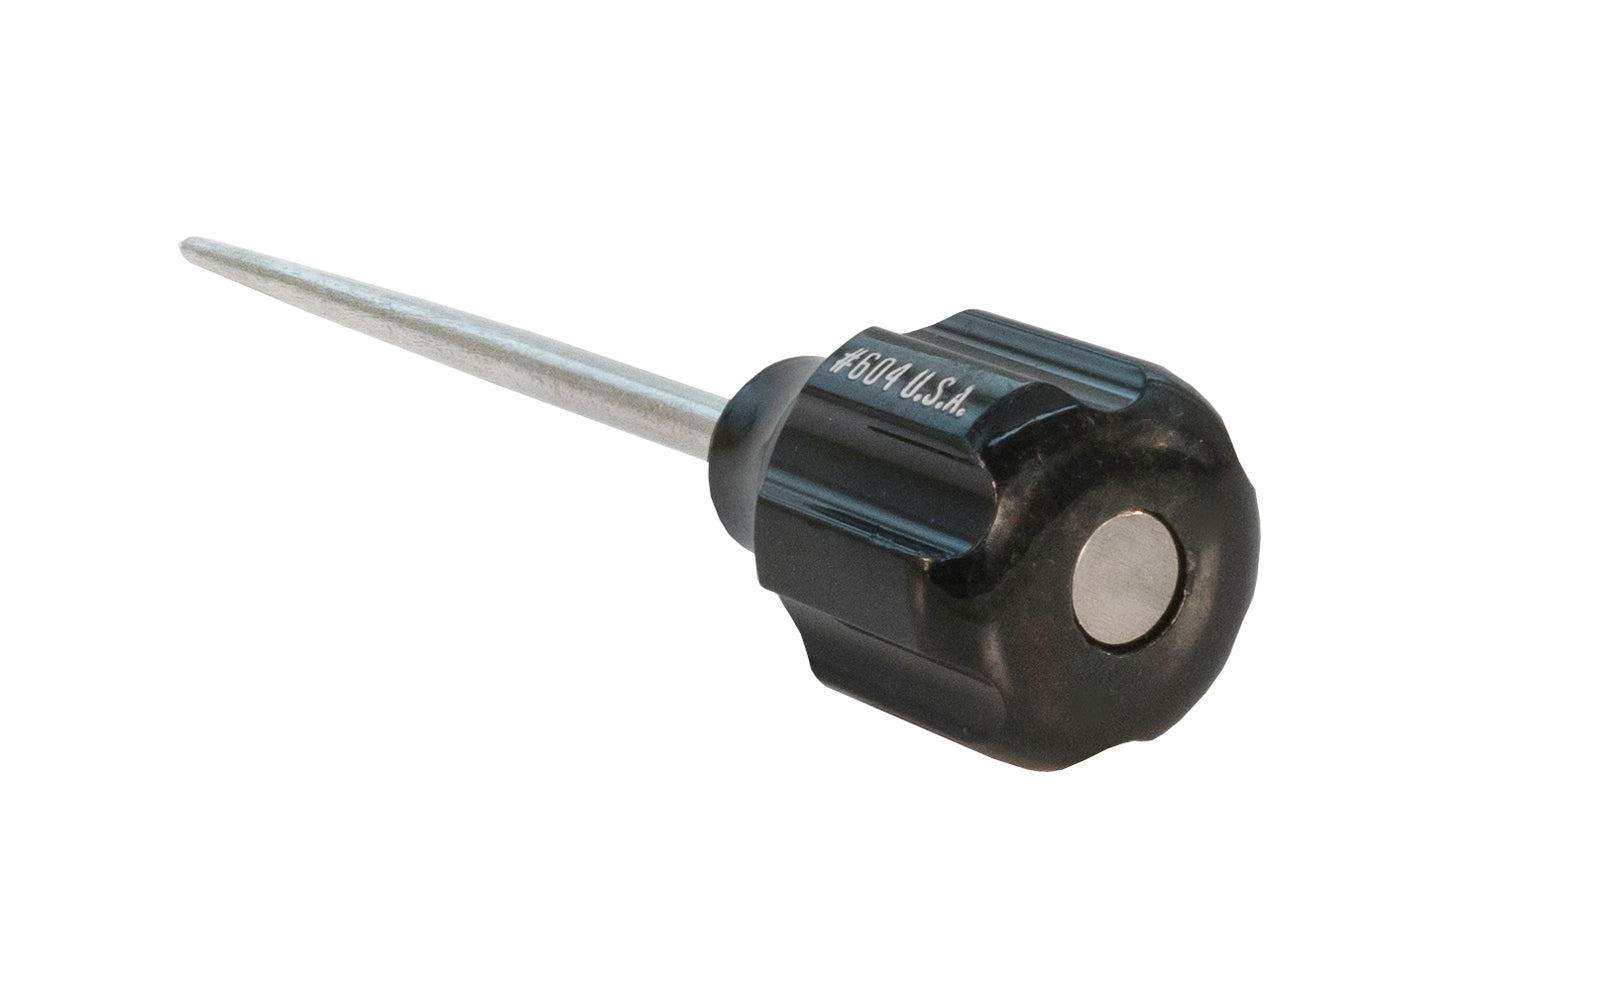 What is a Scratch Awl Used for? Find Out Its Versatile Applications!